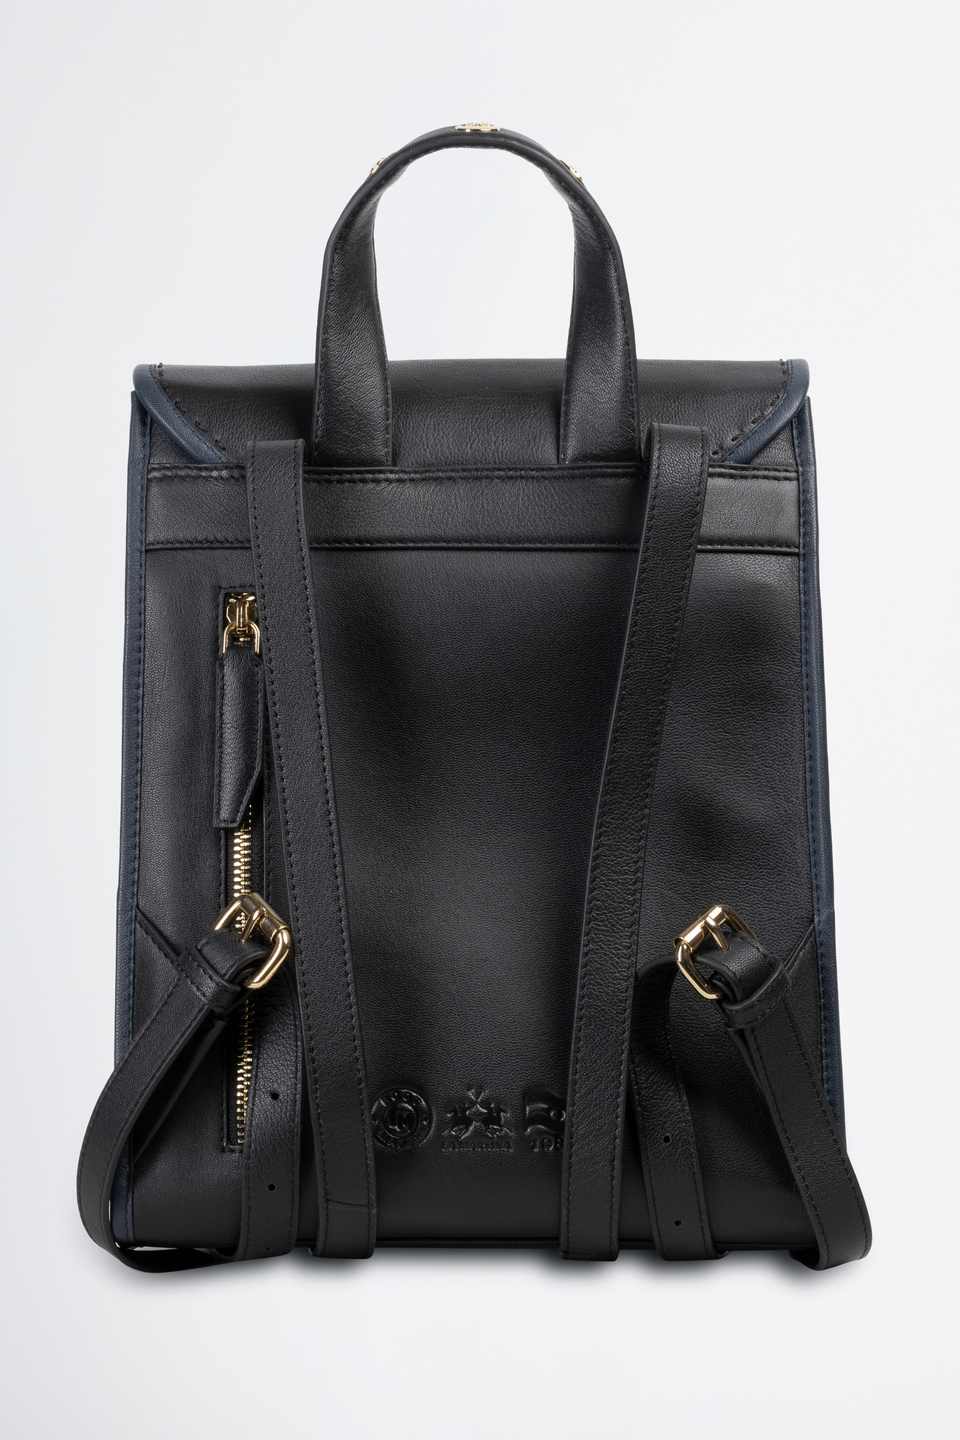 Backpack in calf leather leather | La Martina - Official Online Shop